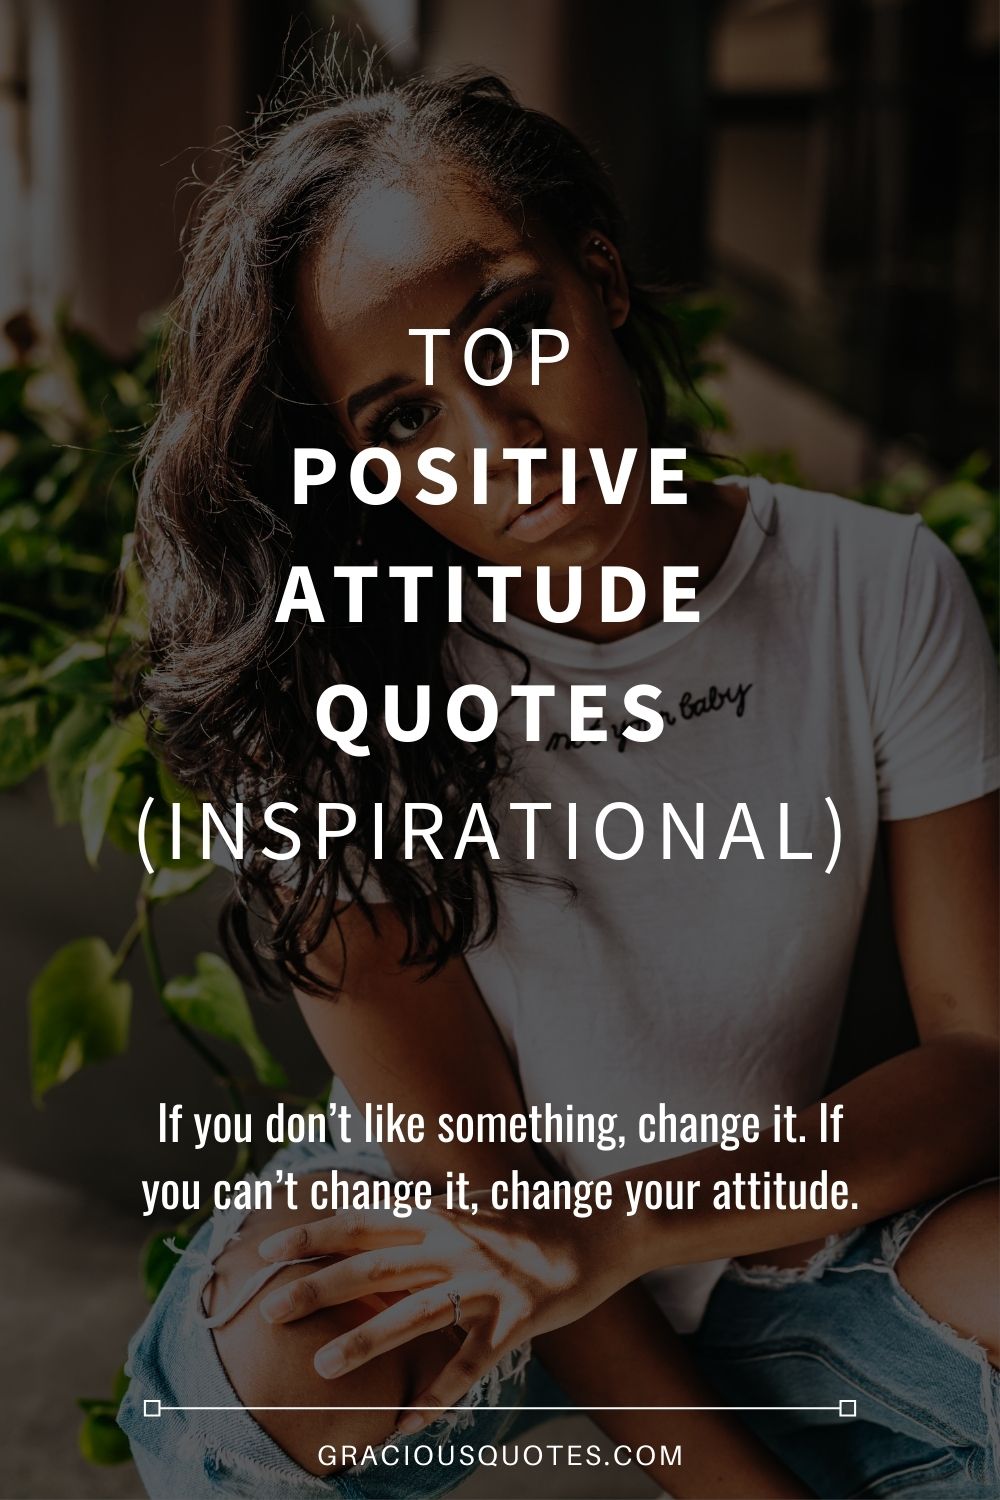 Your Positive Attitude Quotes